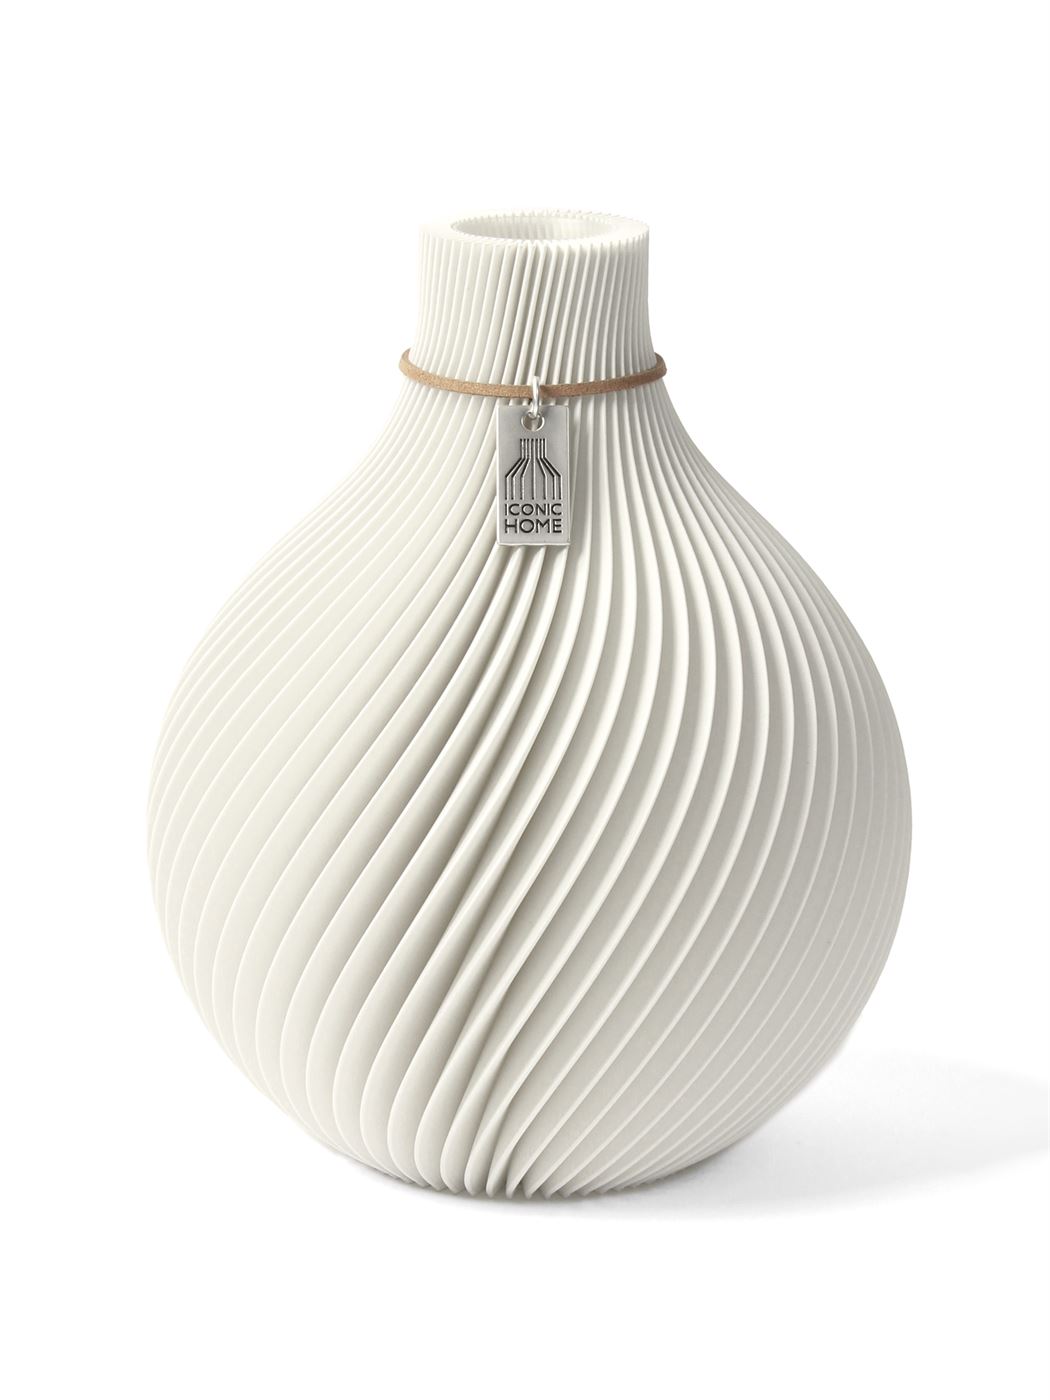 Vase Sphere Pure White Small ICONIC HOME